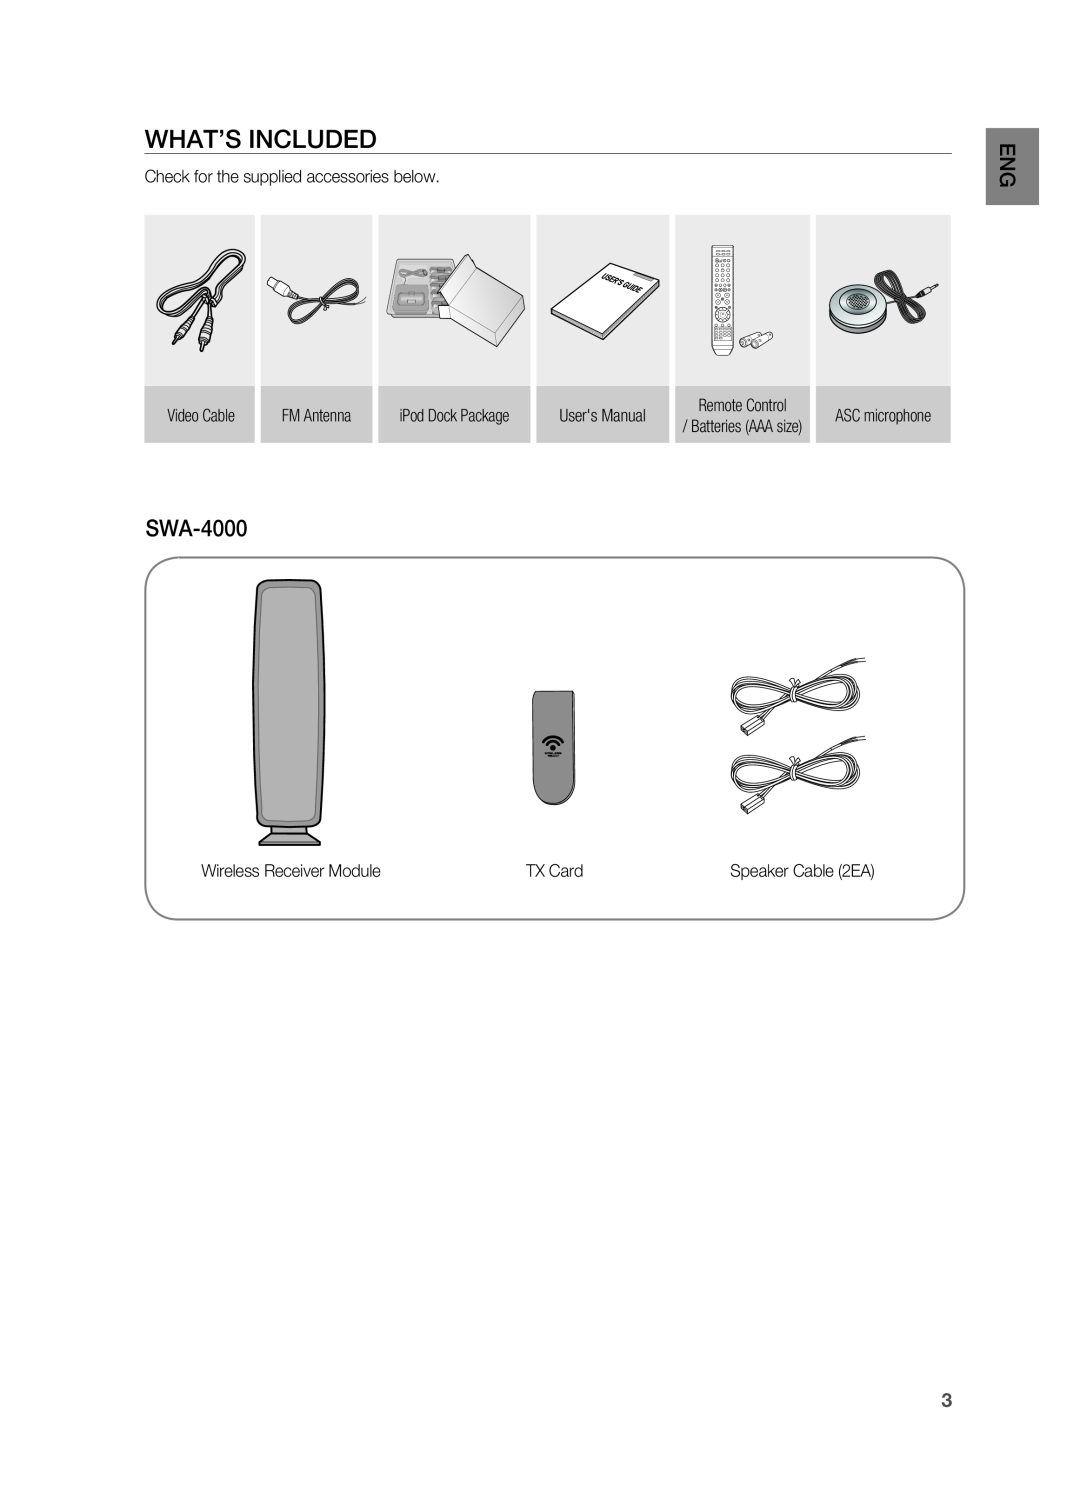 Samsung HT-TWZ415 user manual What’S Included, SWA-4000, Batteries AAA size, Speaker Cable 2EA 